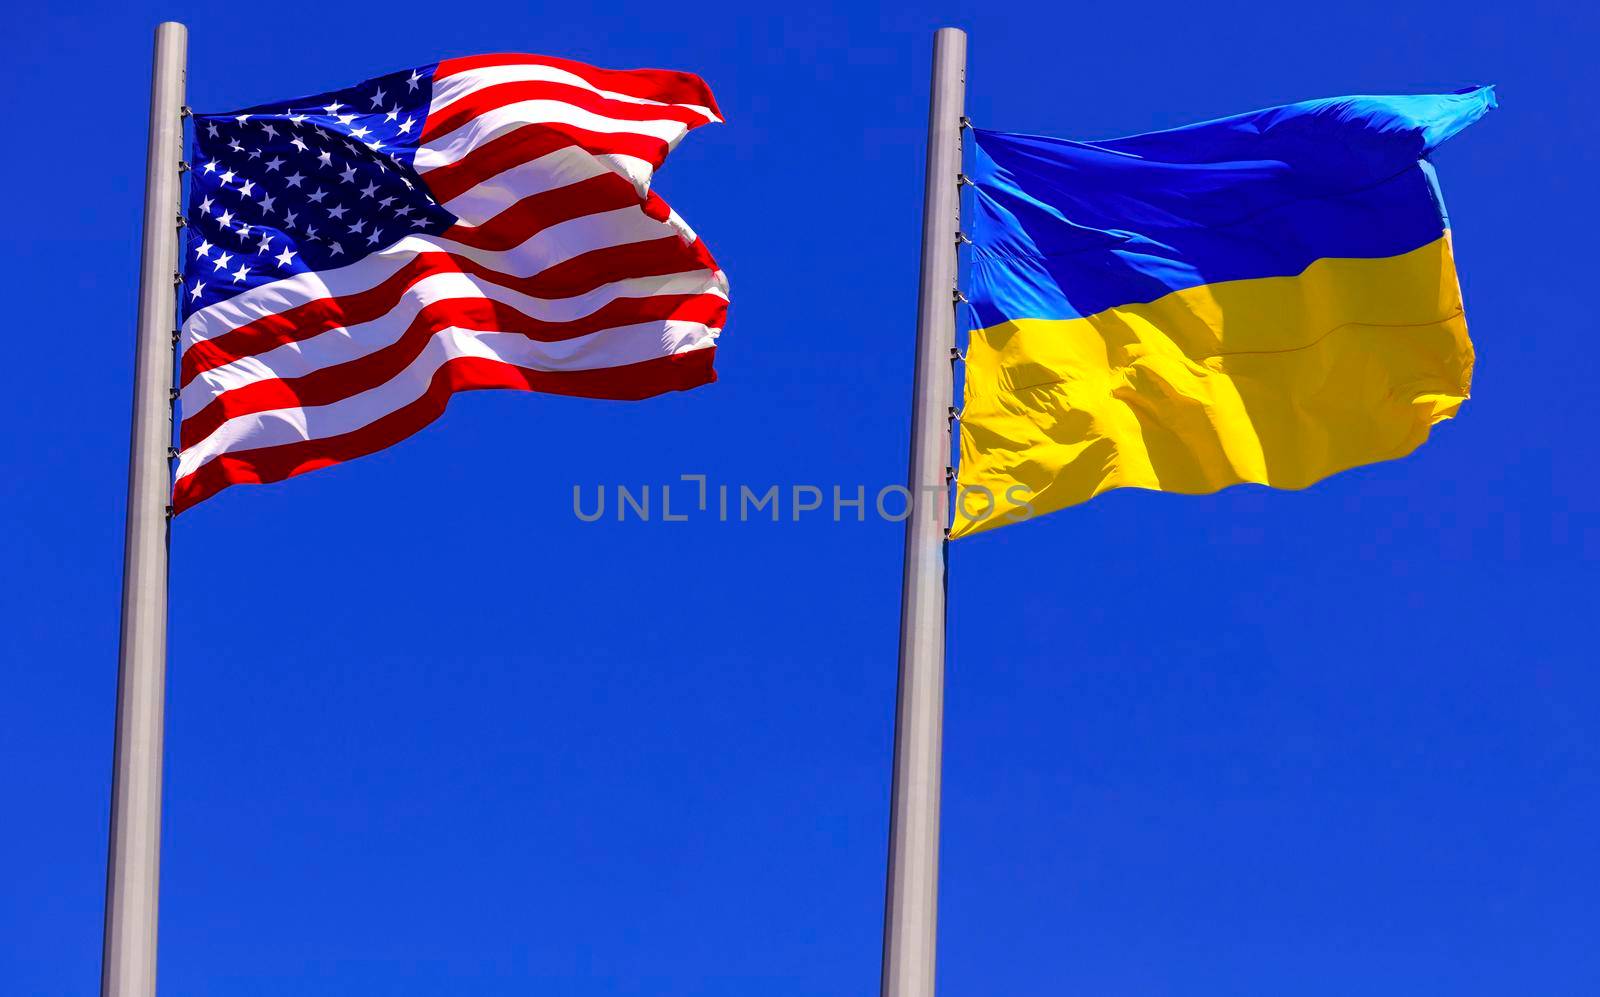 flags of the USA and Ukraine against bright blue sky